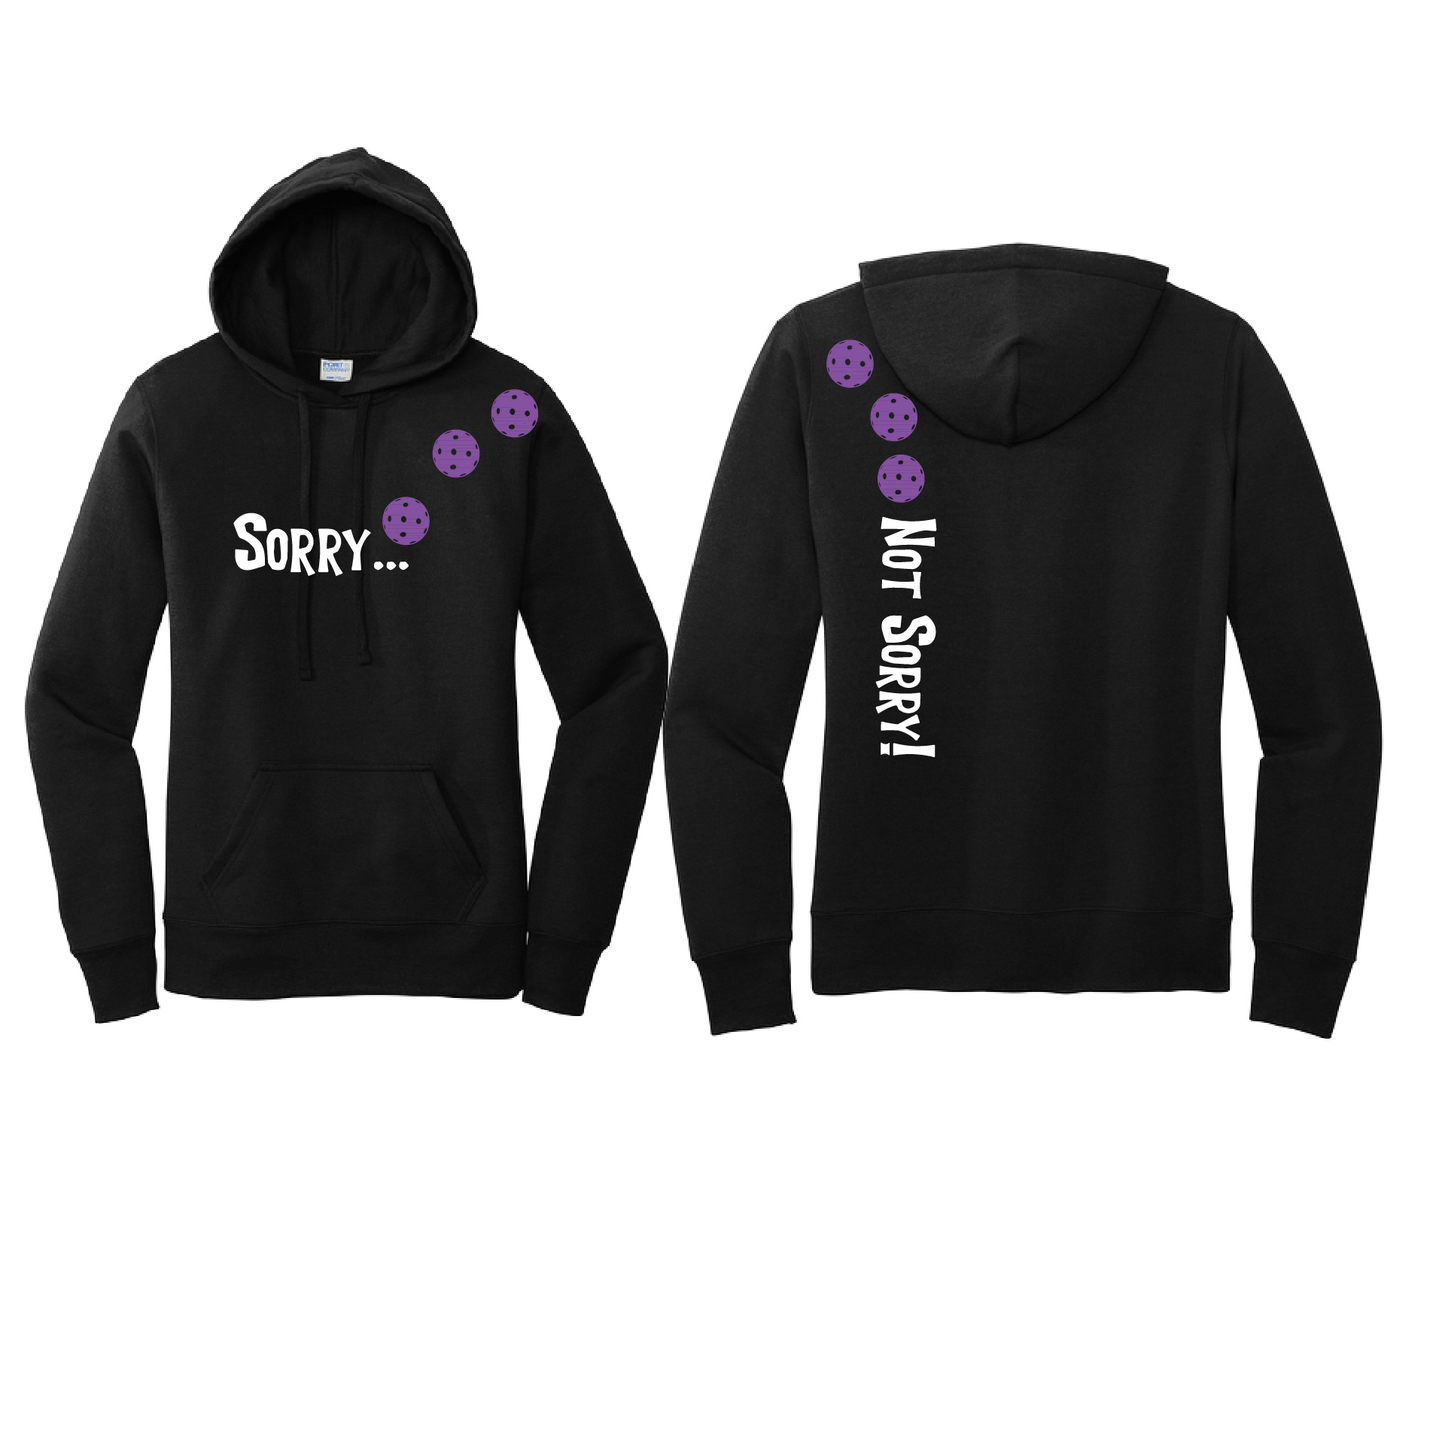 Pickleball Design: Sorry...Not Sorry!! with Customizable Ball Color - Choose: Cyan, Orange, Purple or Rainbow Style: Women's Hooded pullover Sweatshirt Turn up the volume in this Women's Sweatshirts with its perfect mix of softness and attitude. Ultra soft lined inside with a lined hood also. This is fitted nicely for a women's figure. Front pouch pocket.